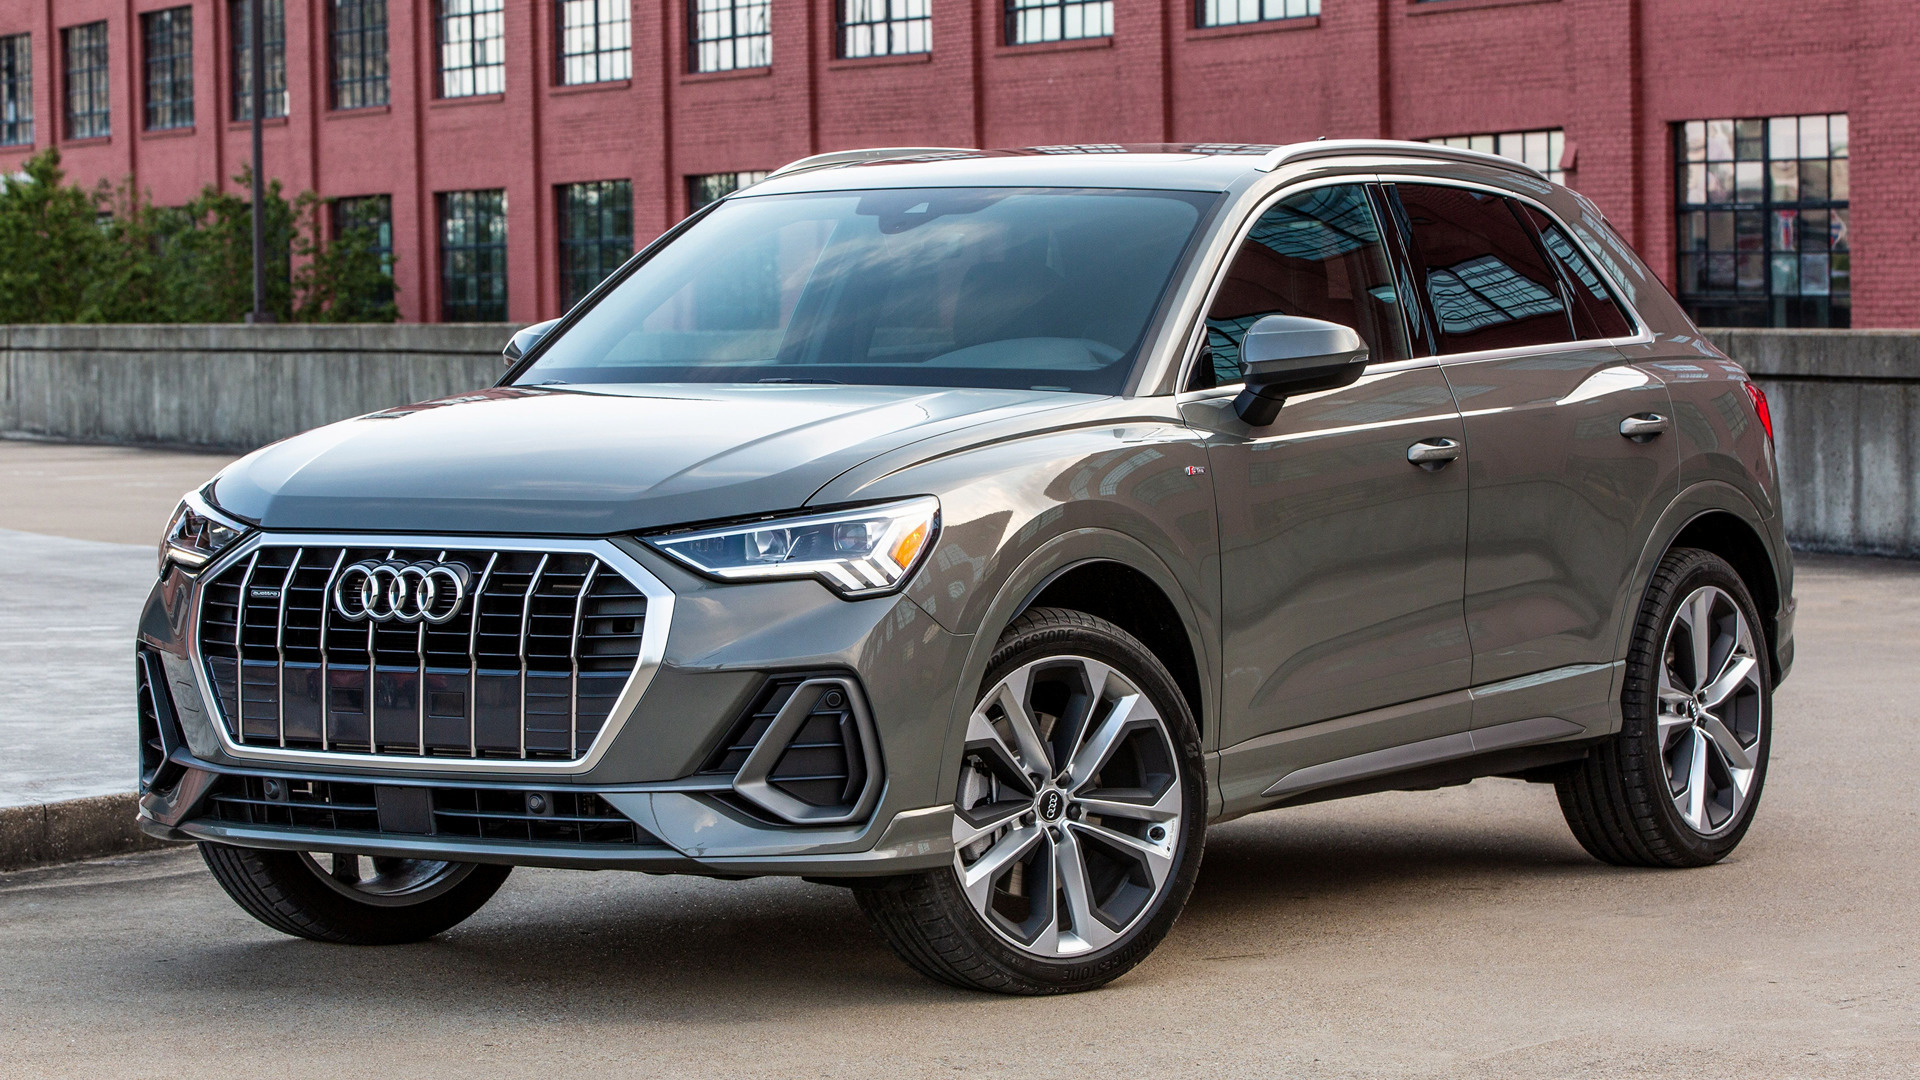 2019 Audi Q3 S line (US) - Wallpapers and HD Images | Car Pixel